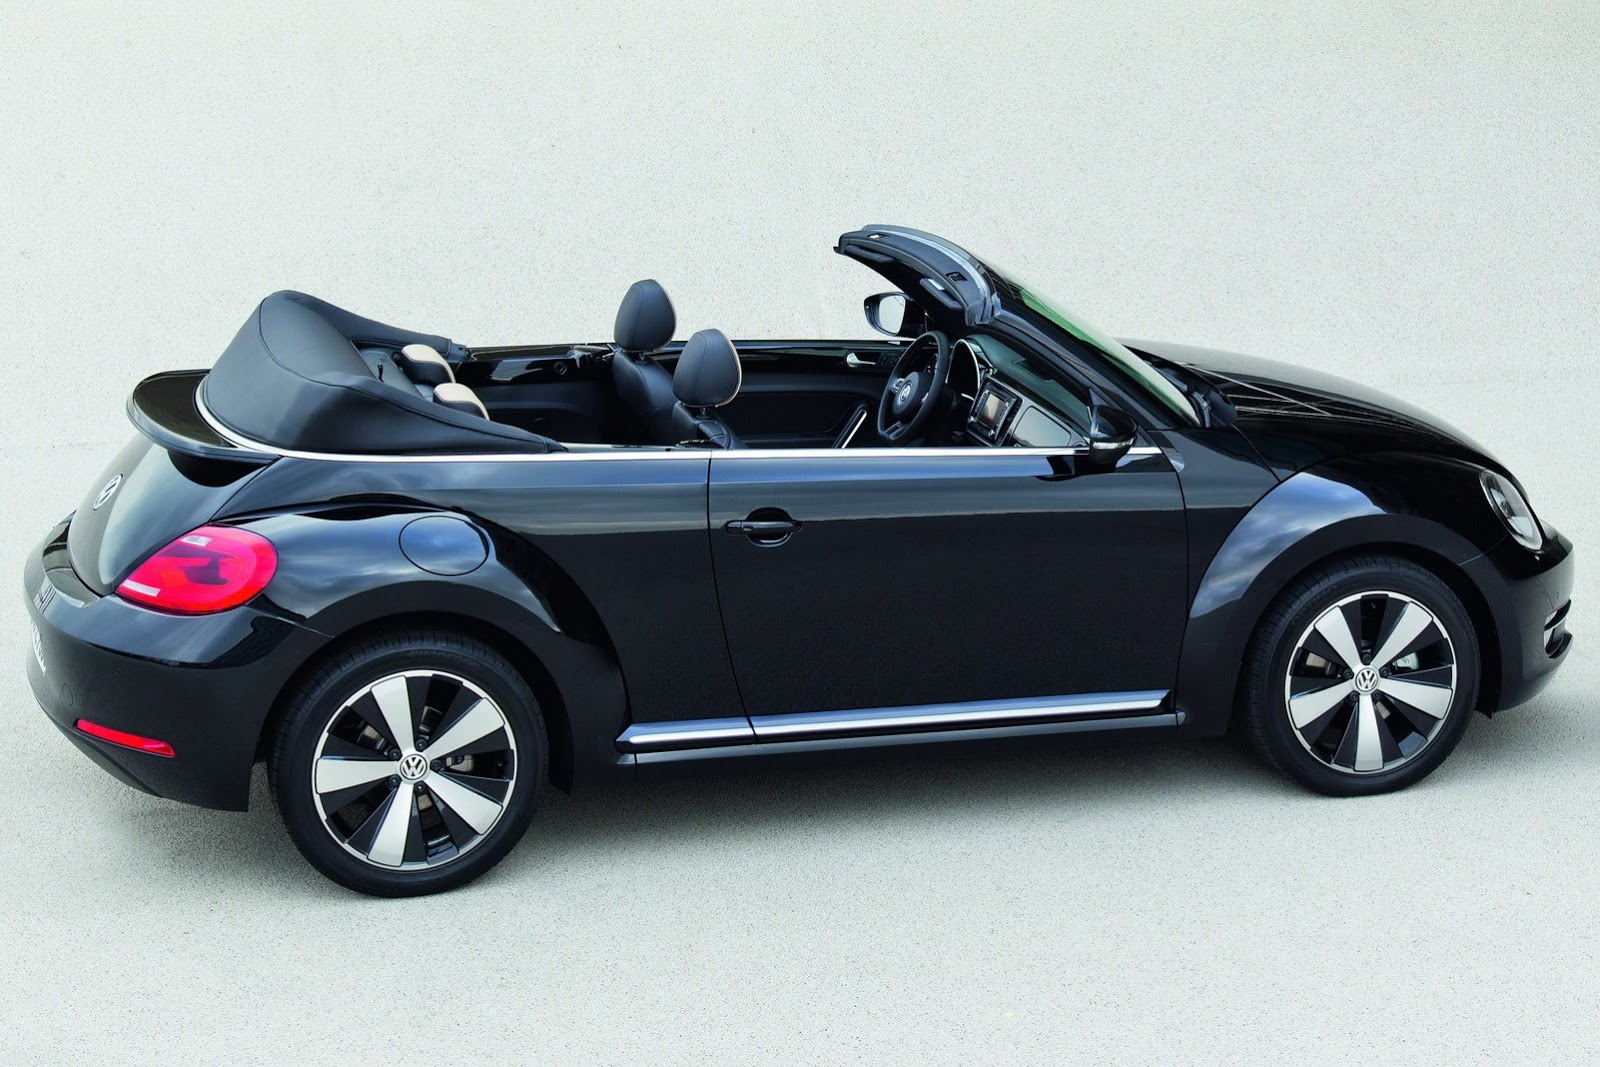 2013 VW Beetle Coupe and Cabriolet Exclusive Editions - autoevolution